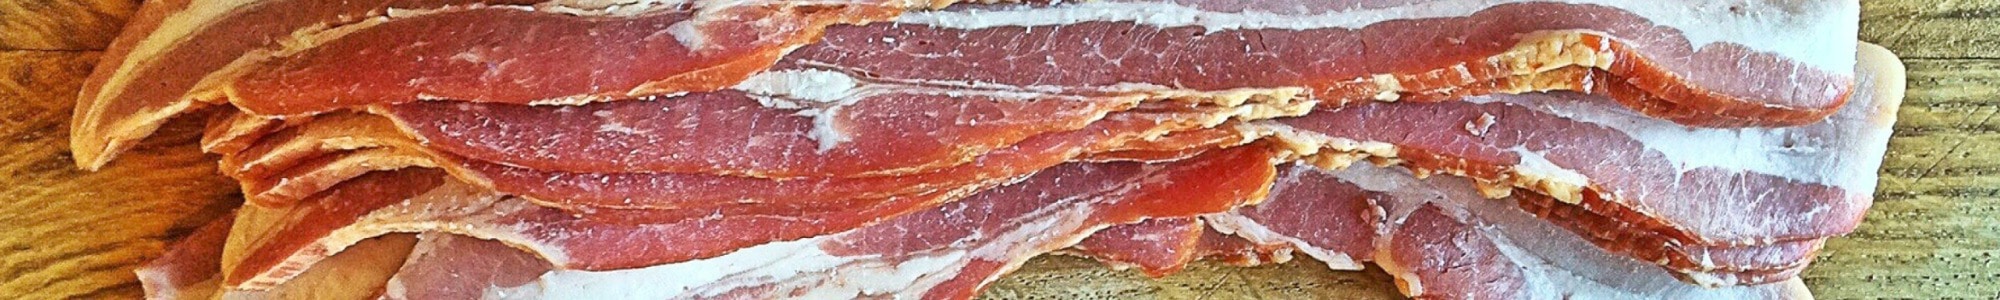 Bacon banner image